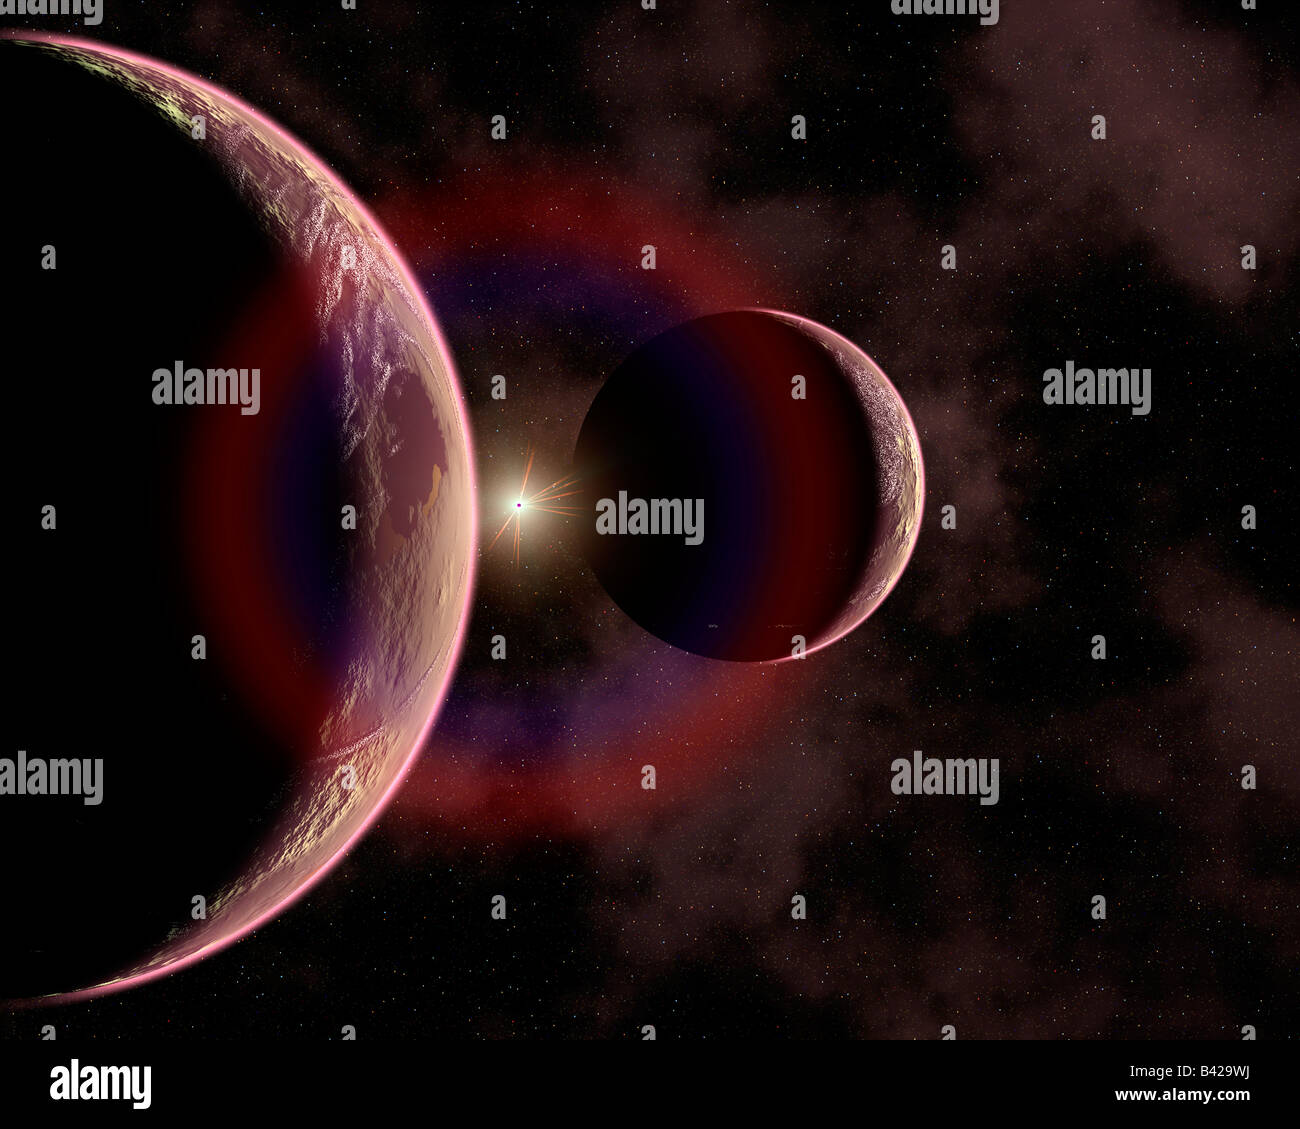 Distant Alien Red Planets, In Orbit Around A Star  Producing A Colourful Halo. Stock Photo